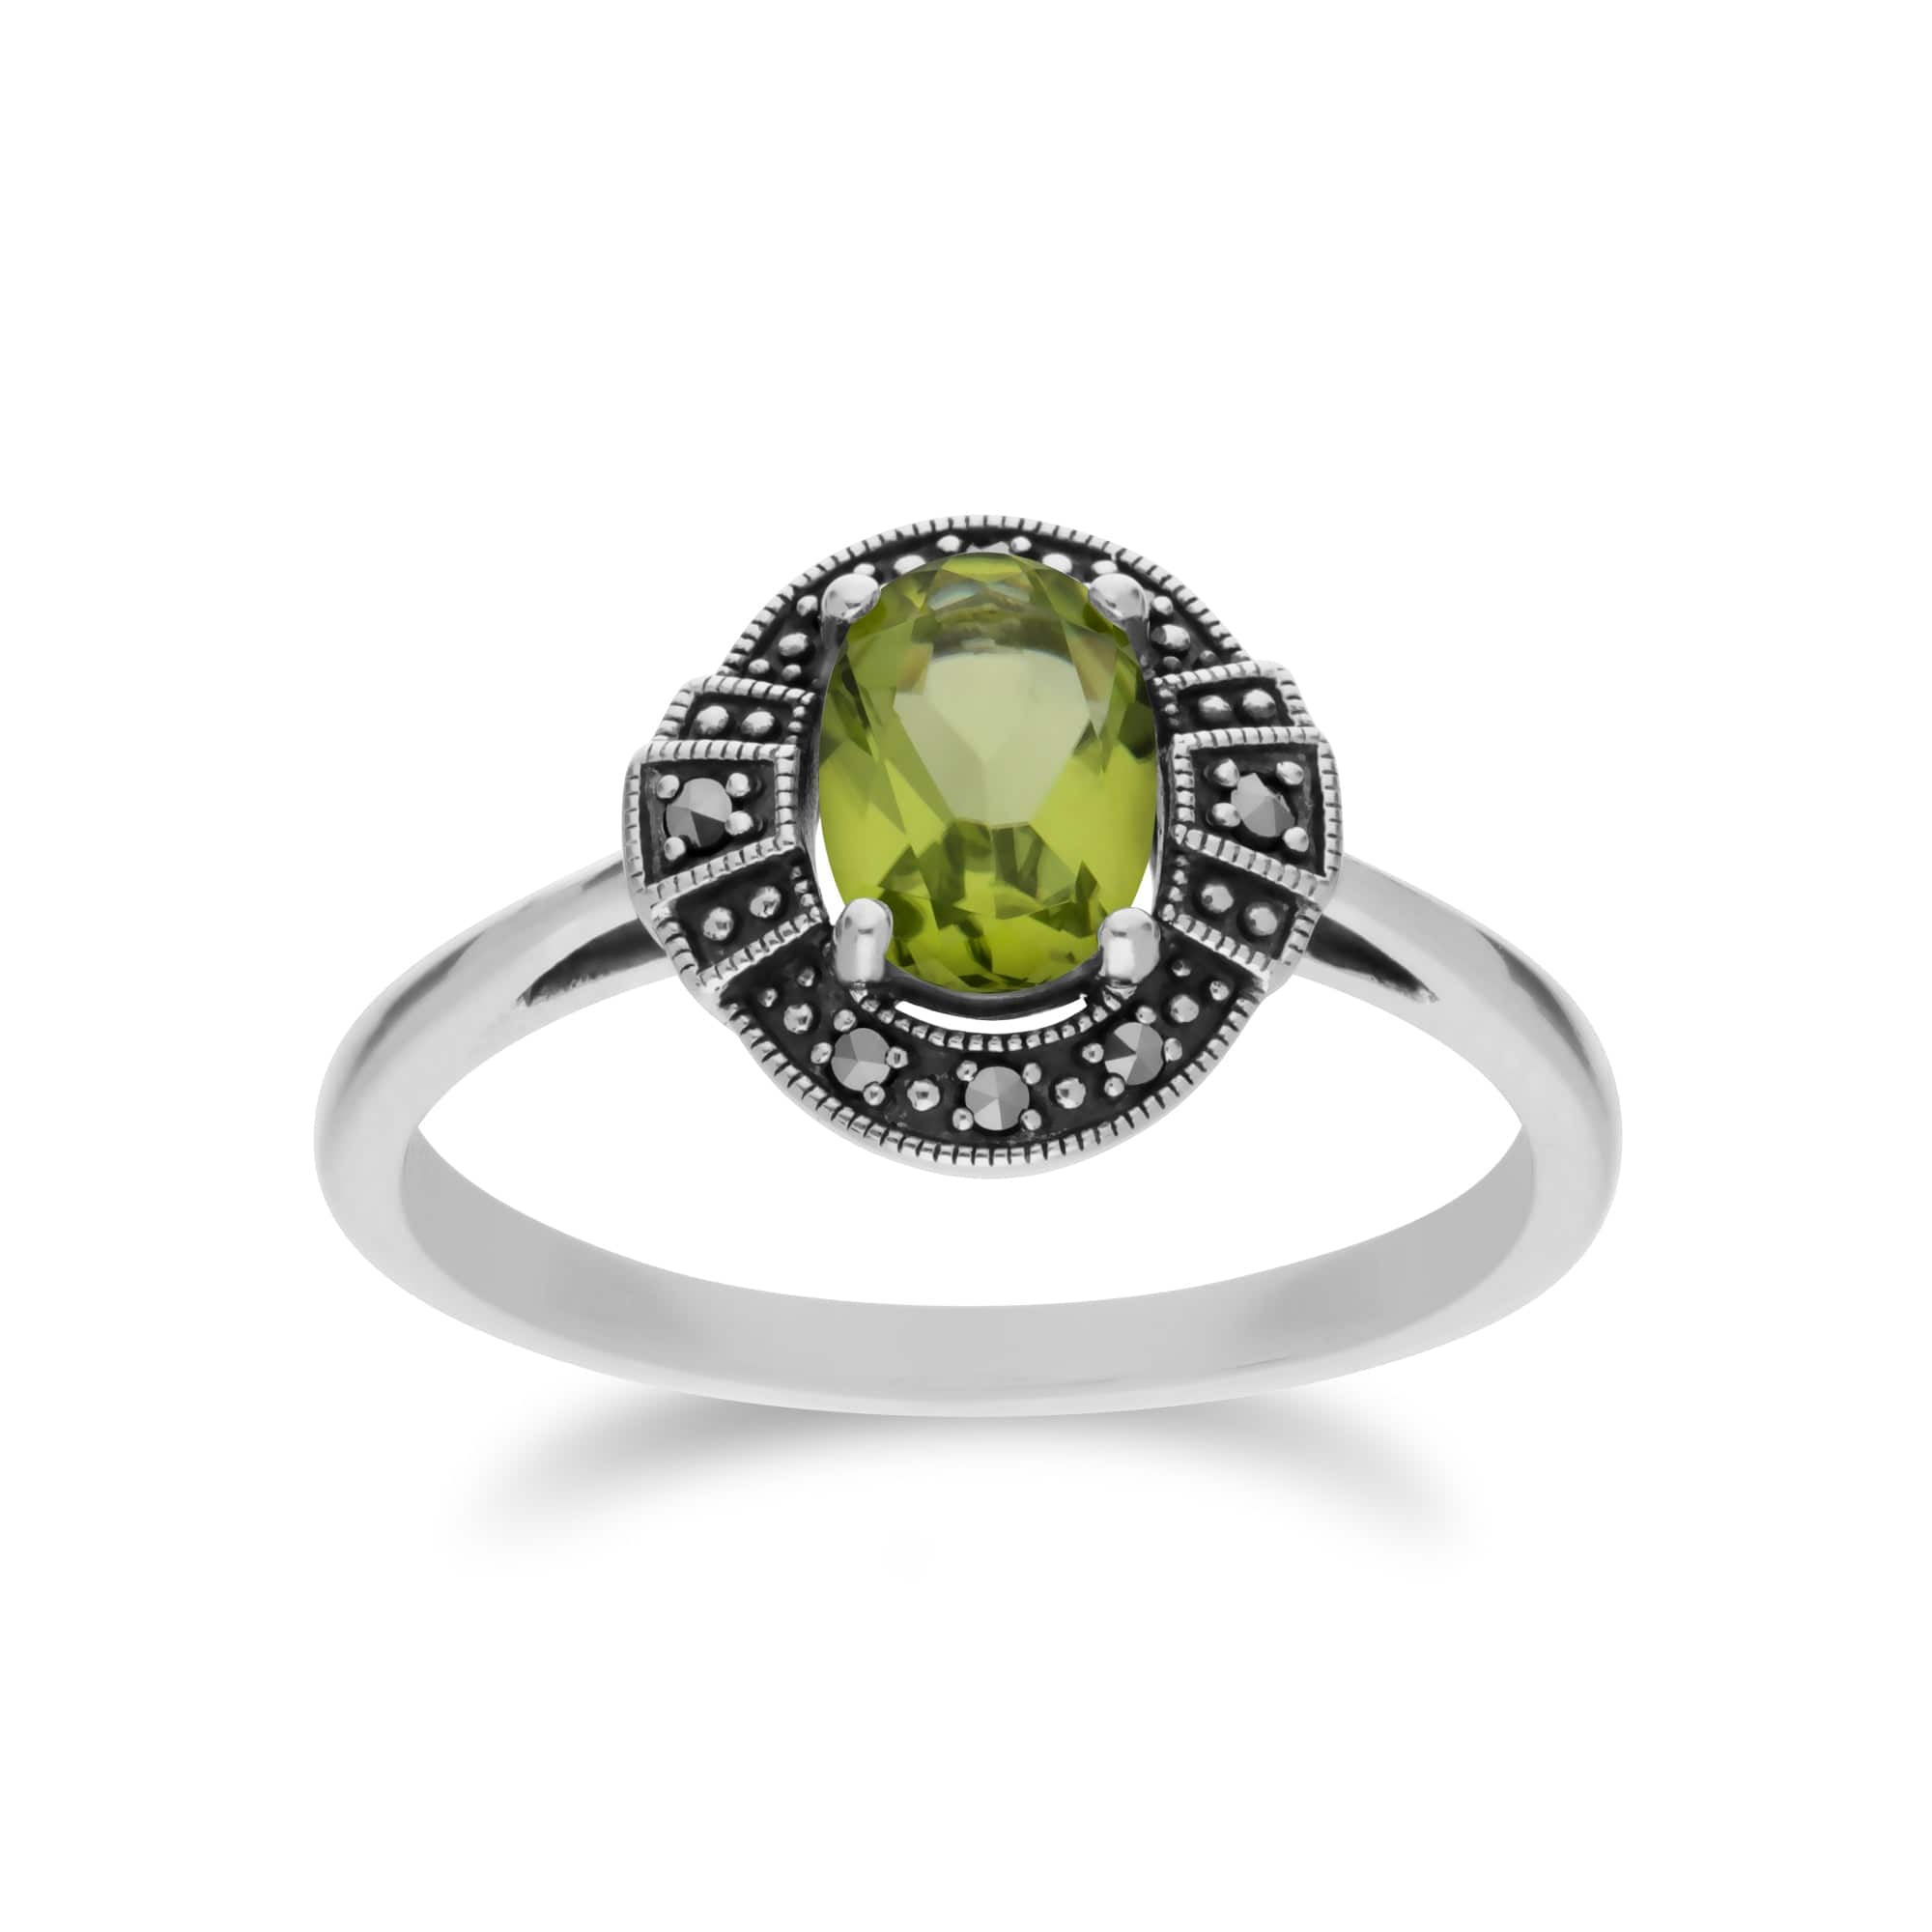 214R605704925 Art Deco Style Oval Peridot & Marcasite Halo Ring in 925 Sterling Silver 1